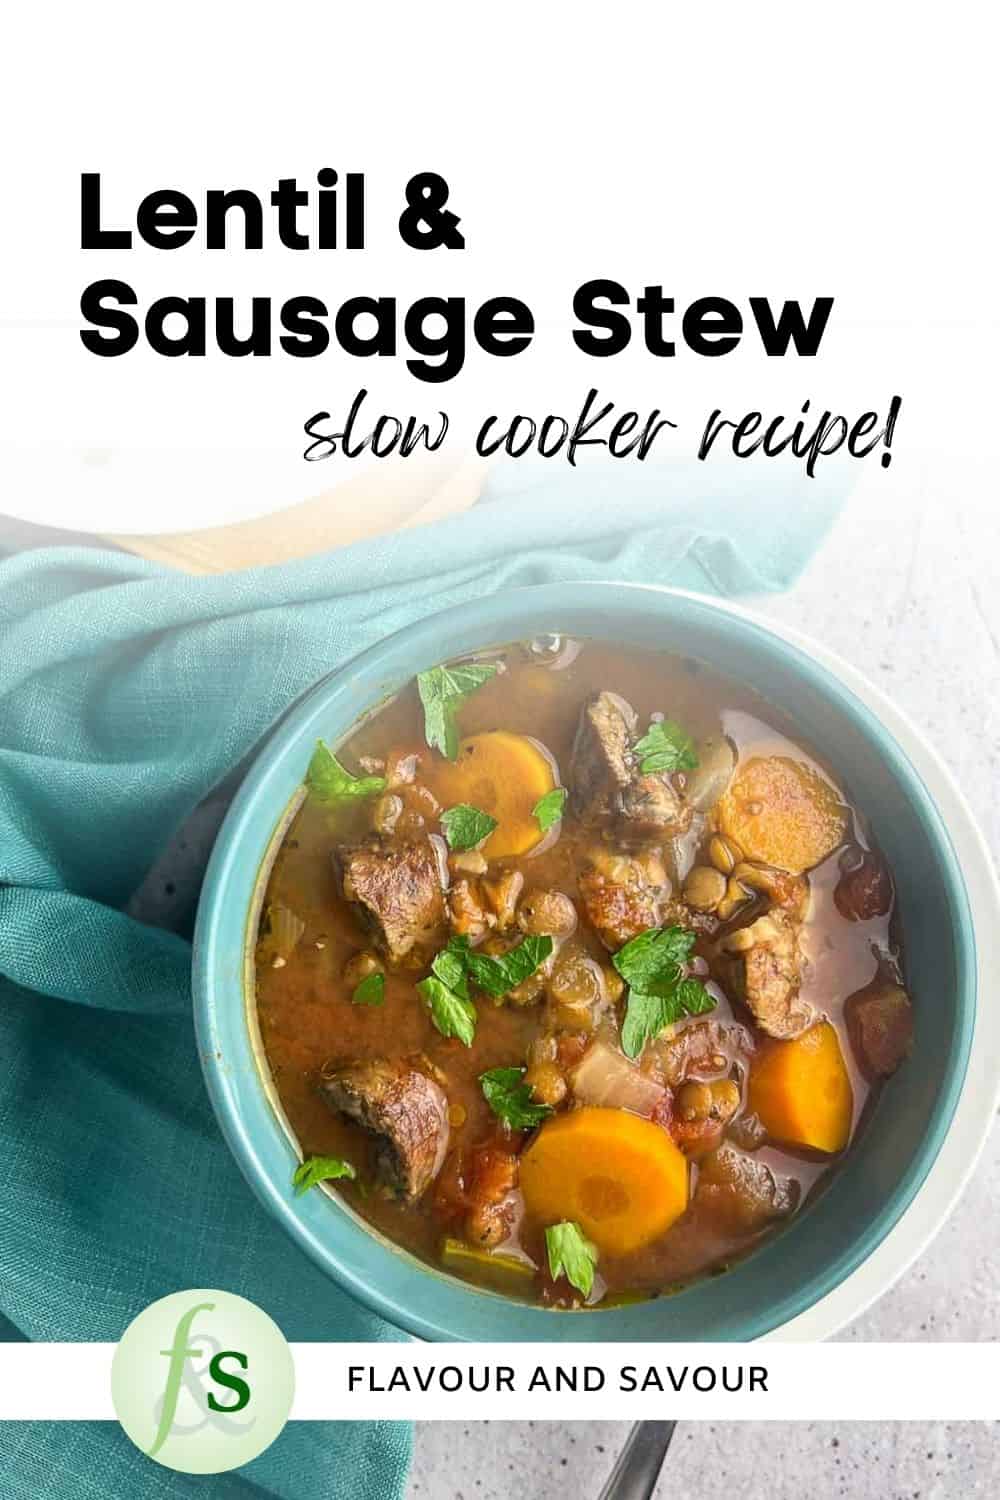 Image with text overlay for slow cooker gluten-free lentil stew with sausage.